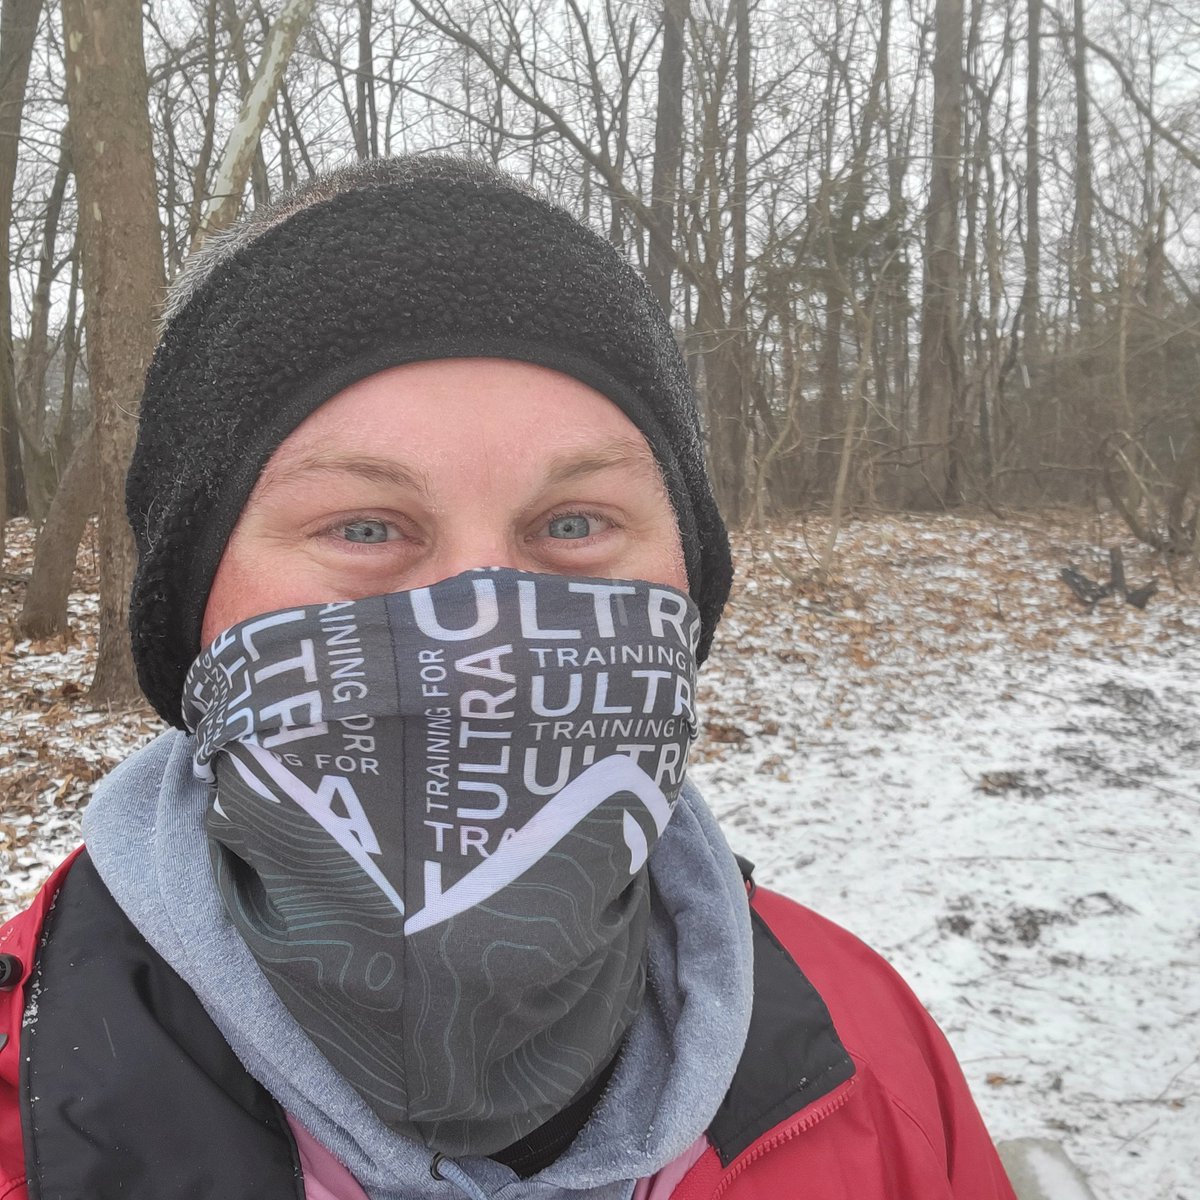 @Training4Ultra 6 chapters in and really enjoying your story. Wore the @Training4Ultra buff today!